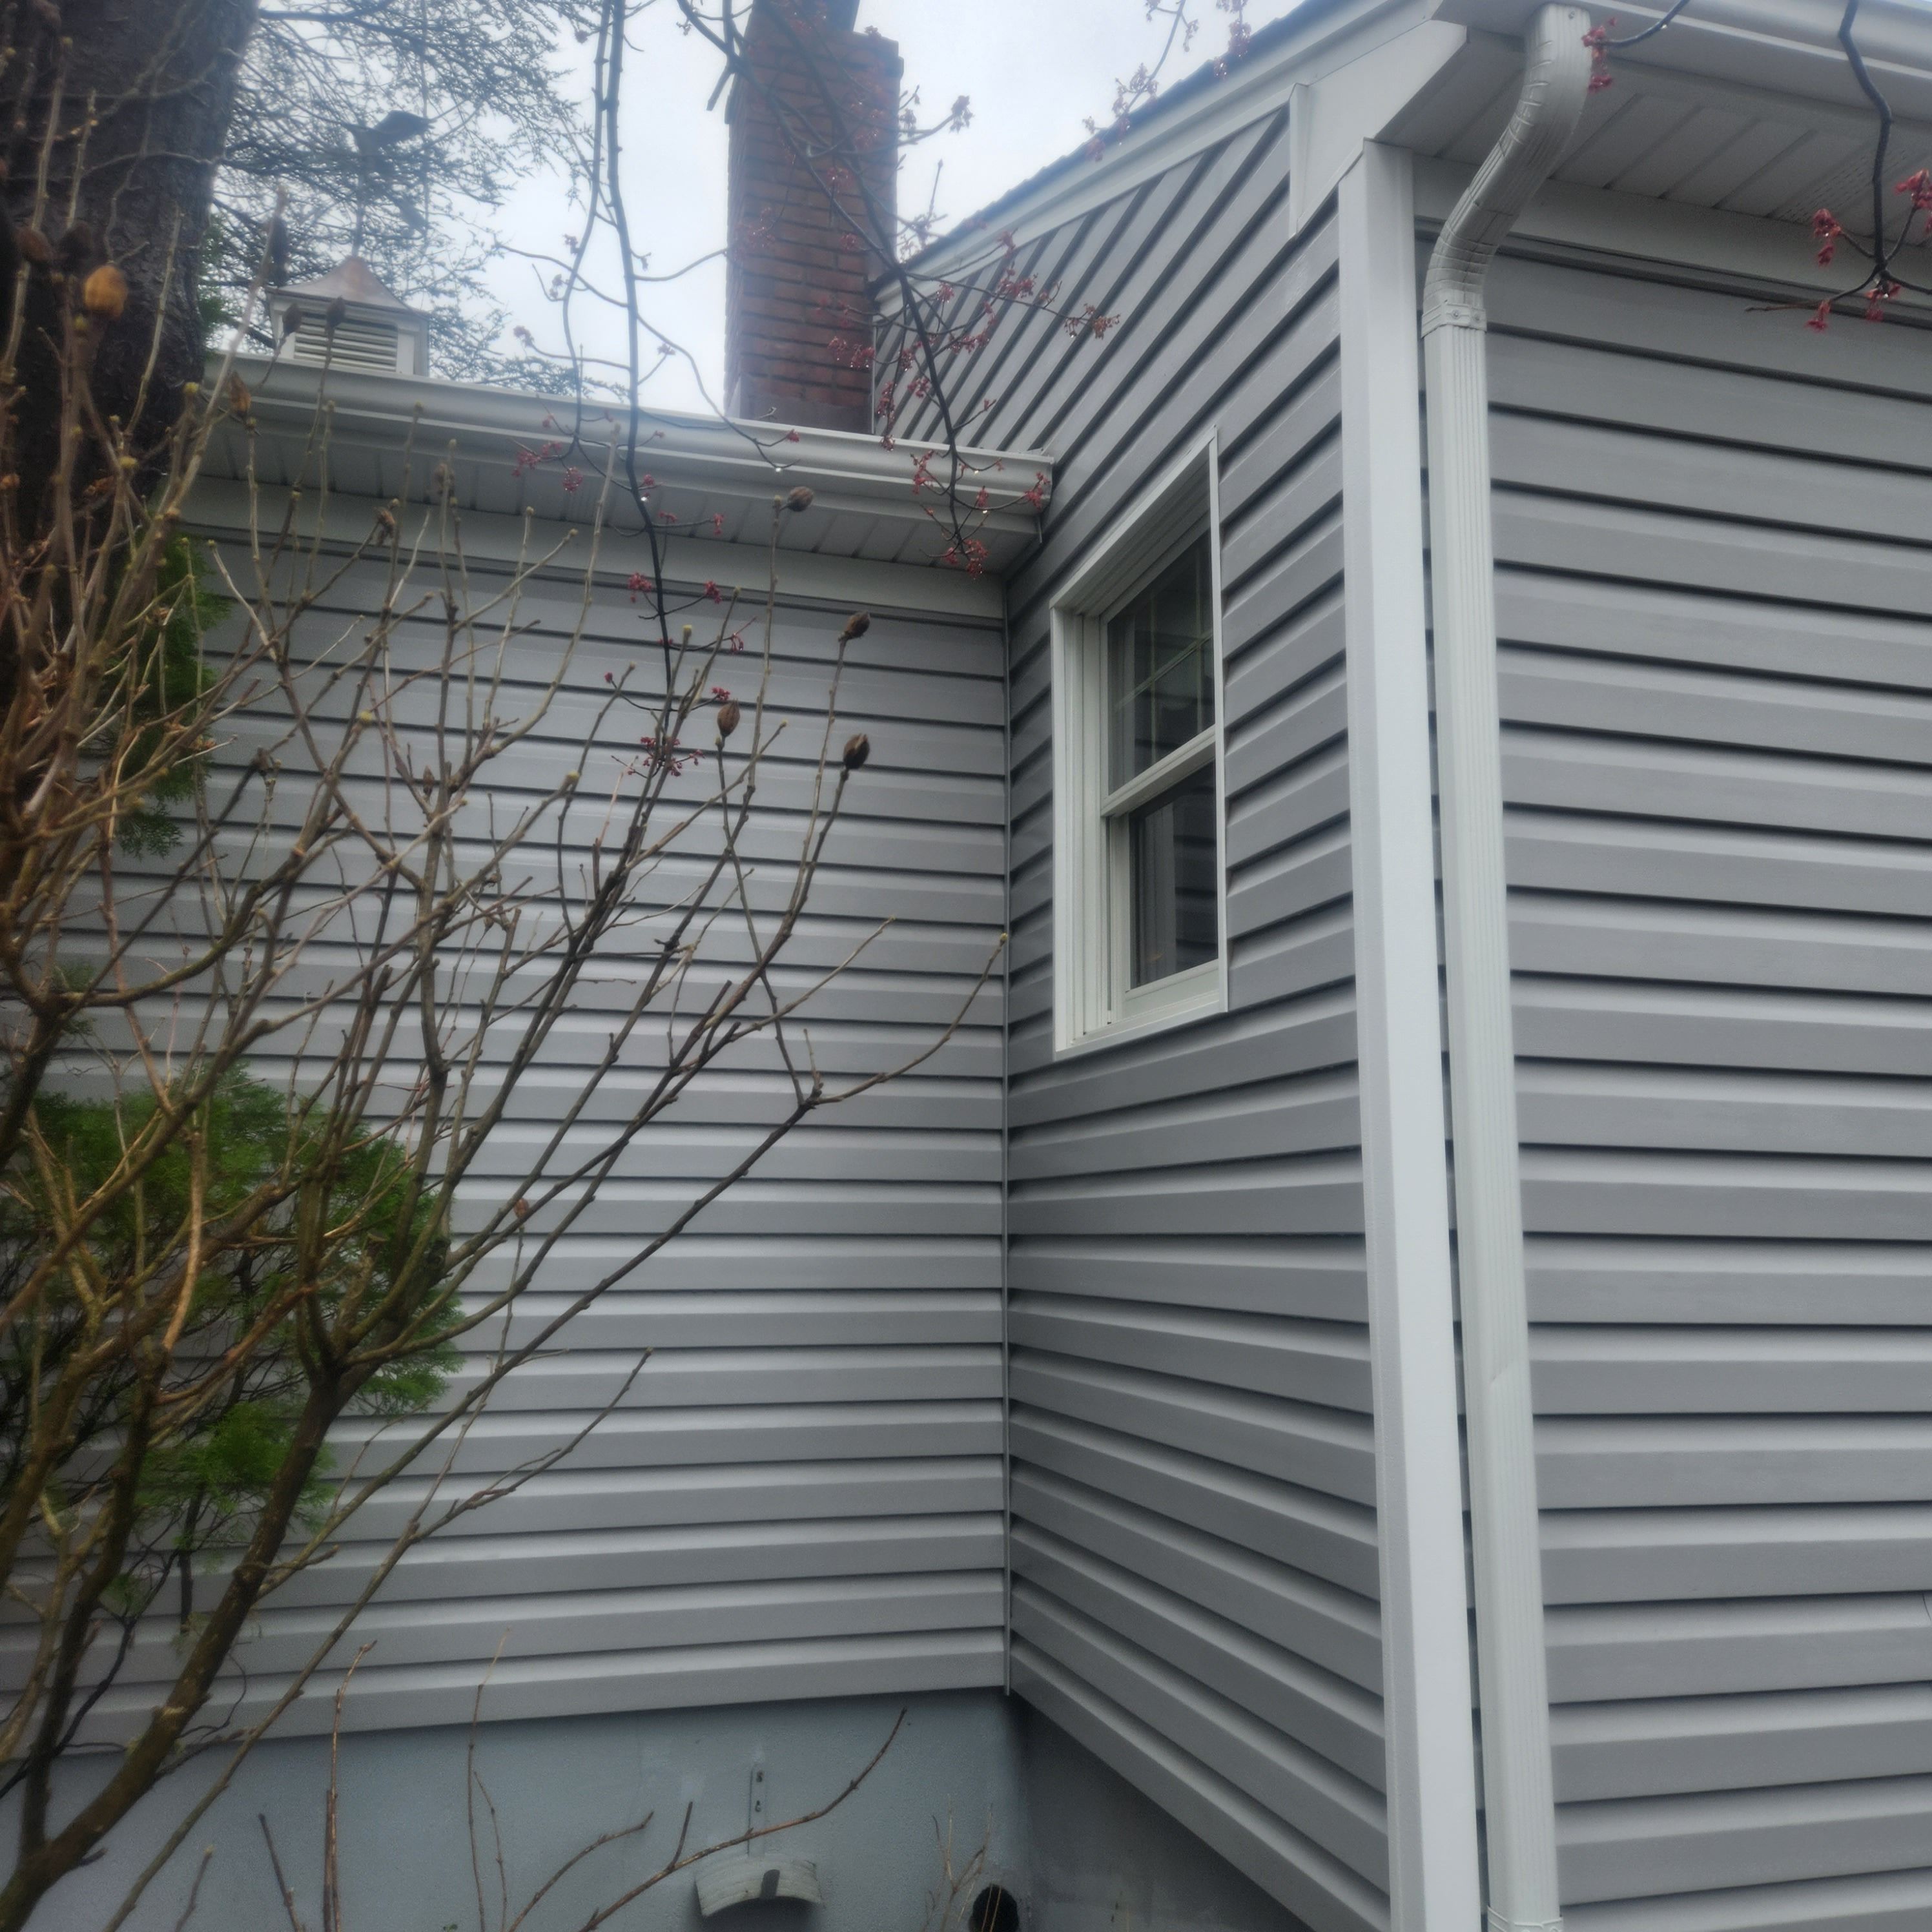 Home Soft wash for READY SET POWER WASHING AND RESTORATION in Essex County, NJ